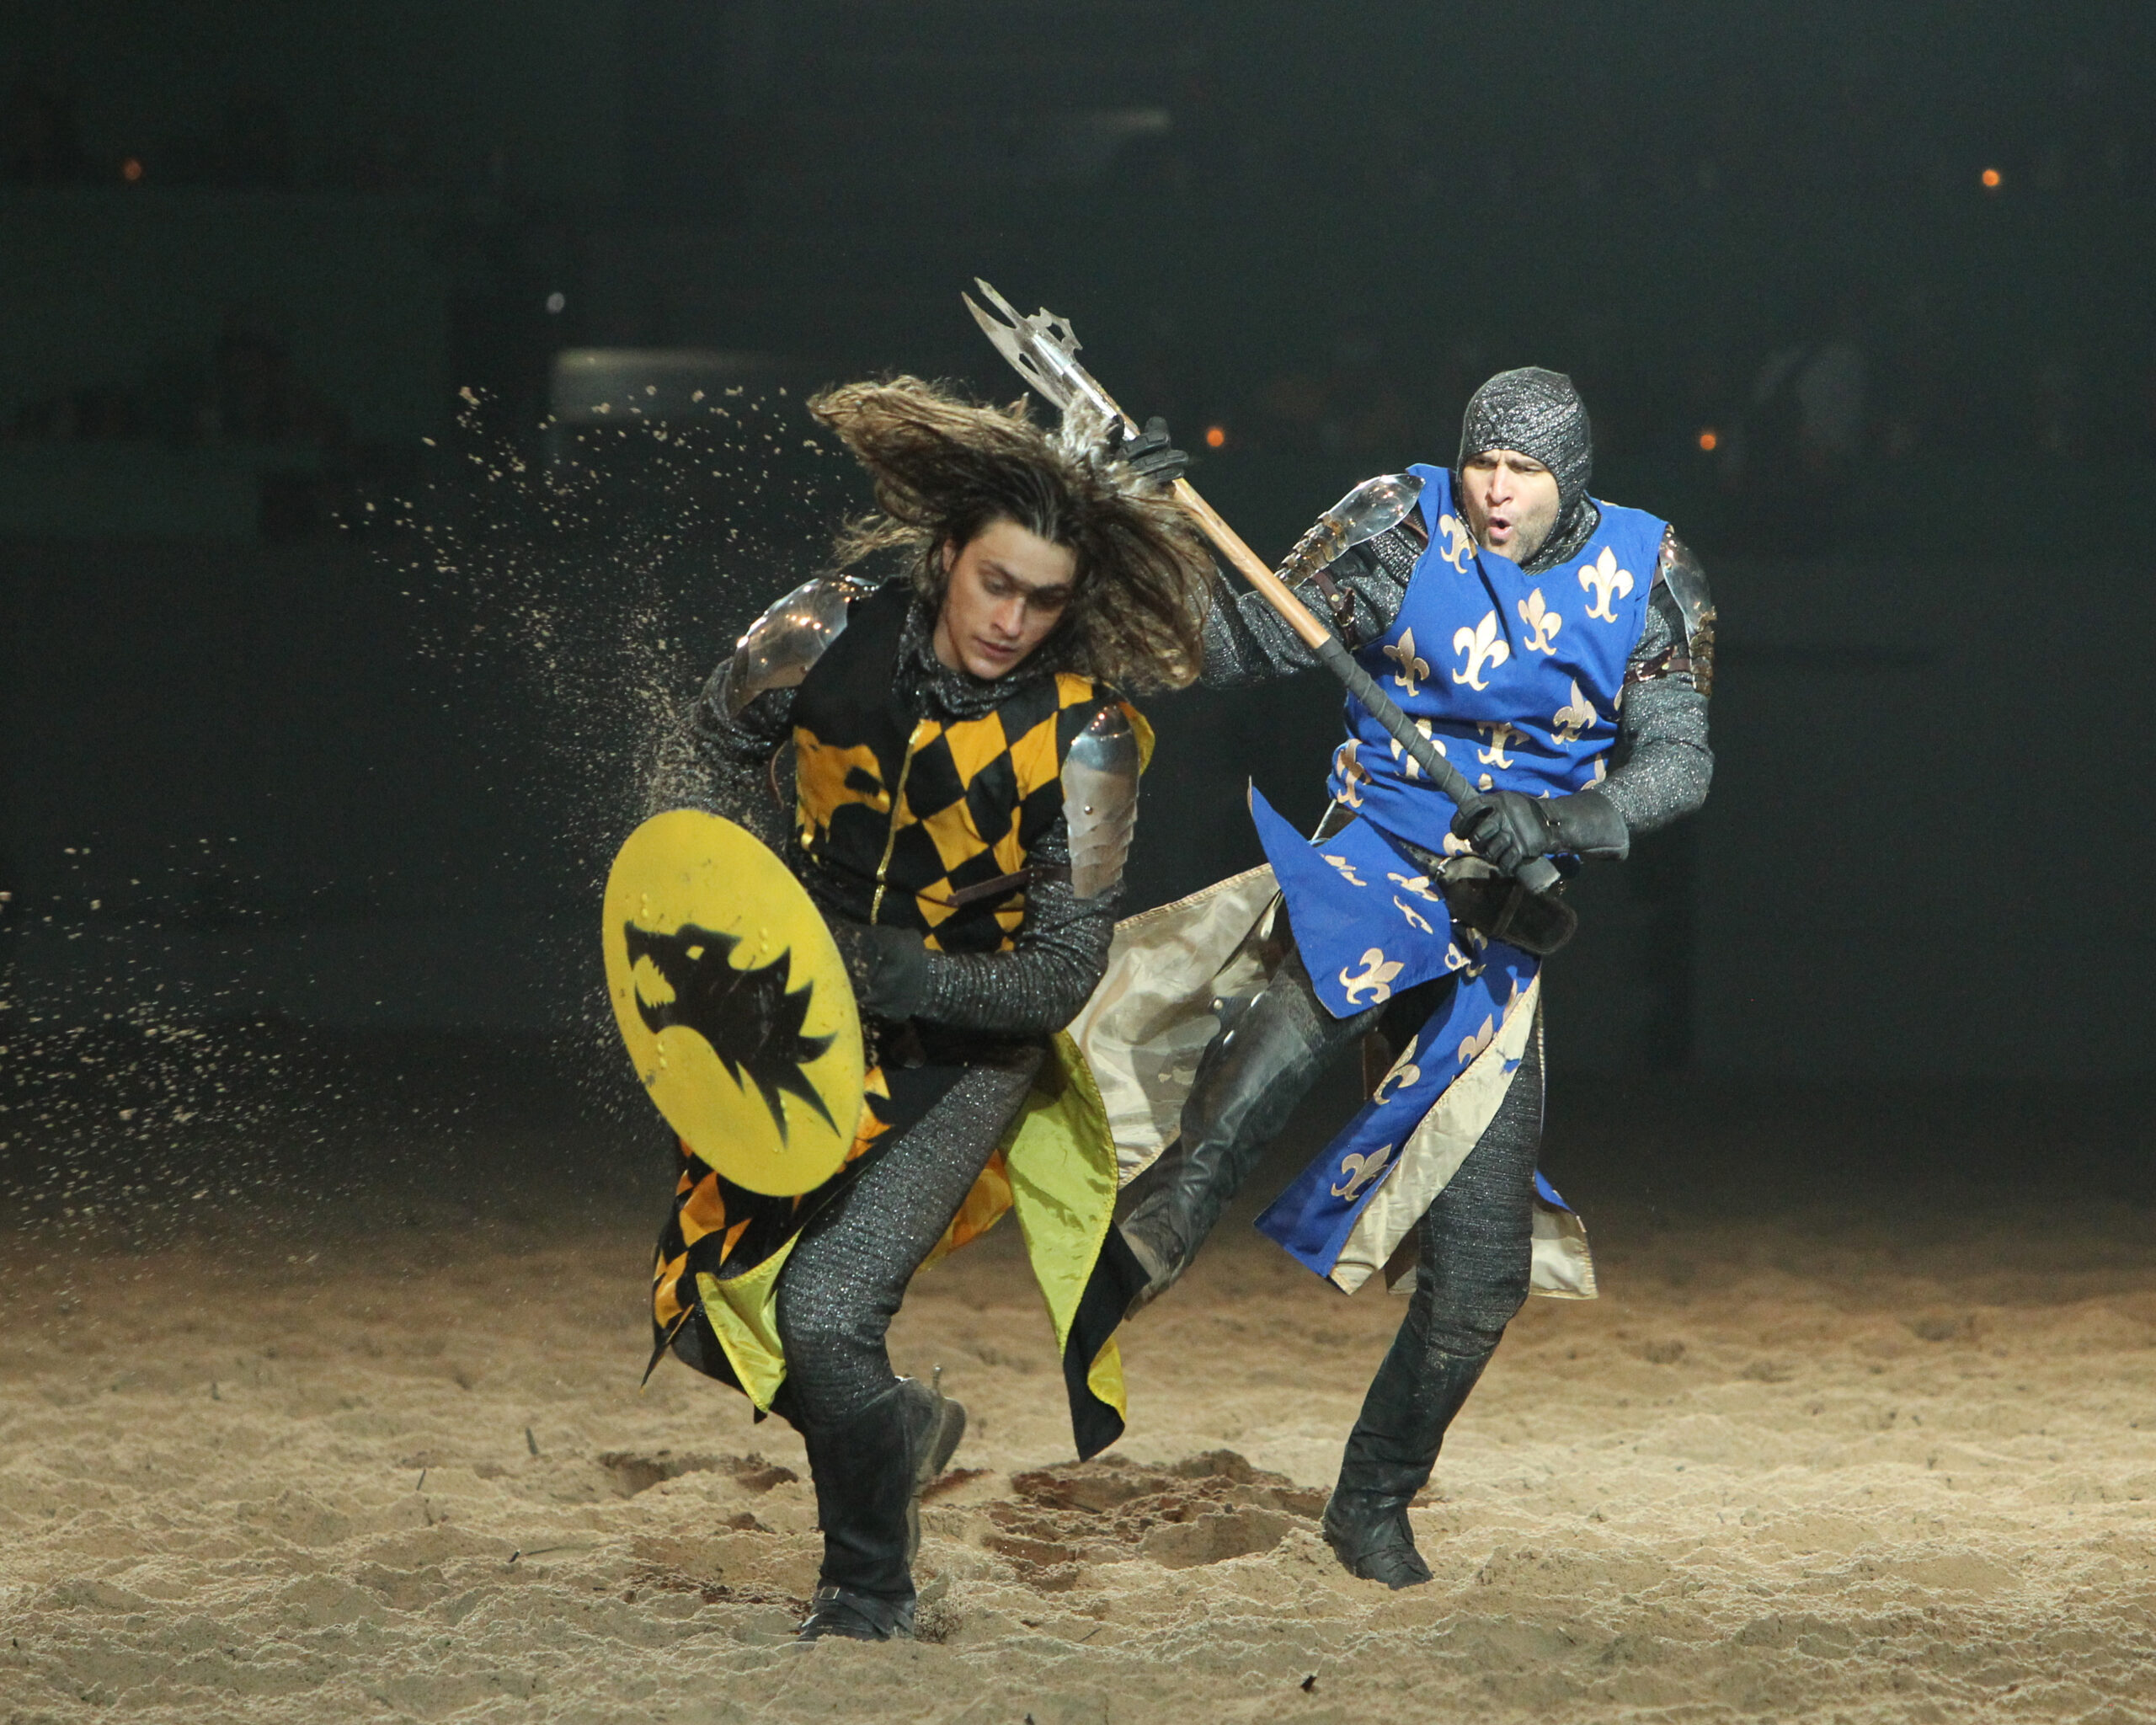 Medieval Times